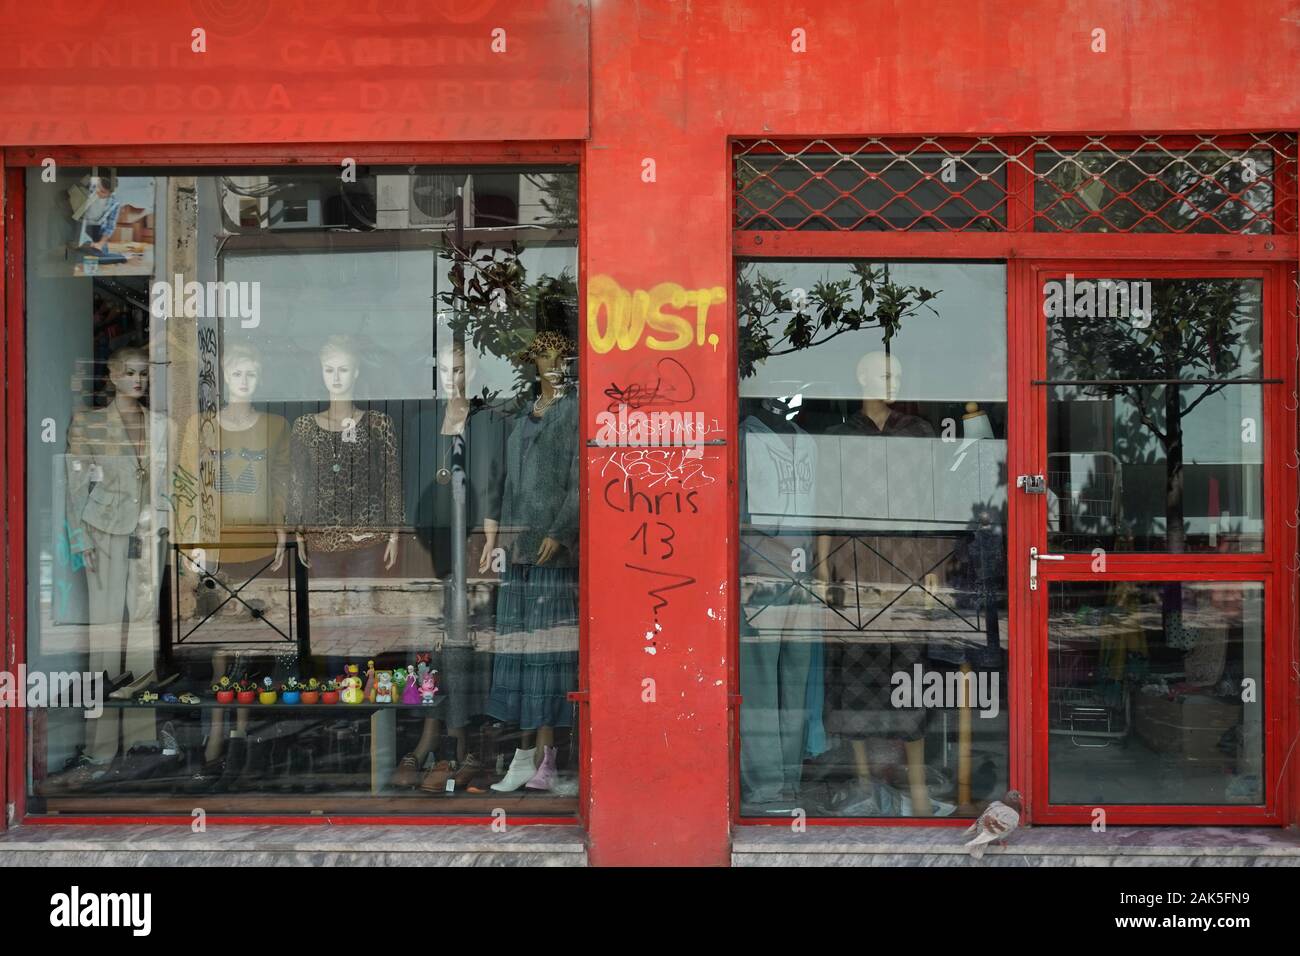 Athens, Greece - March 31, 2019: Small shop storefront window with clothing and goods imported from China. Stock Photo